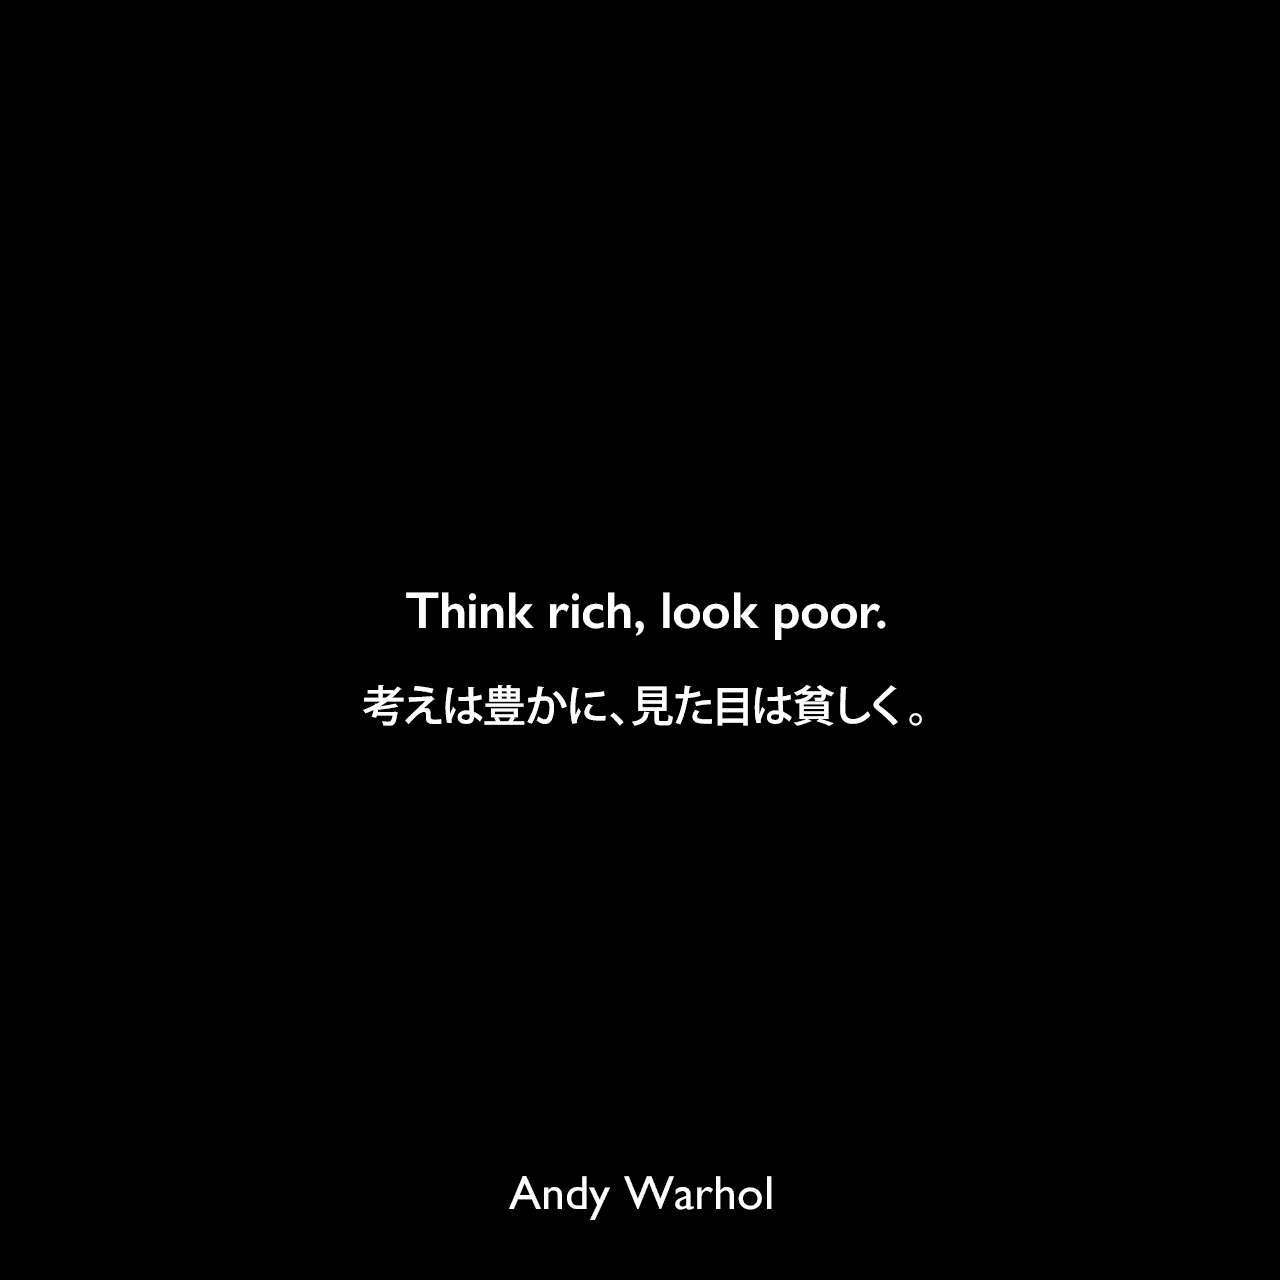 Think rich, look poor.考えは豊かに、見た目は貧しく。Andy Warhol